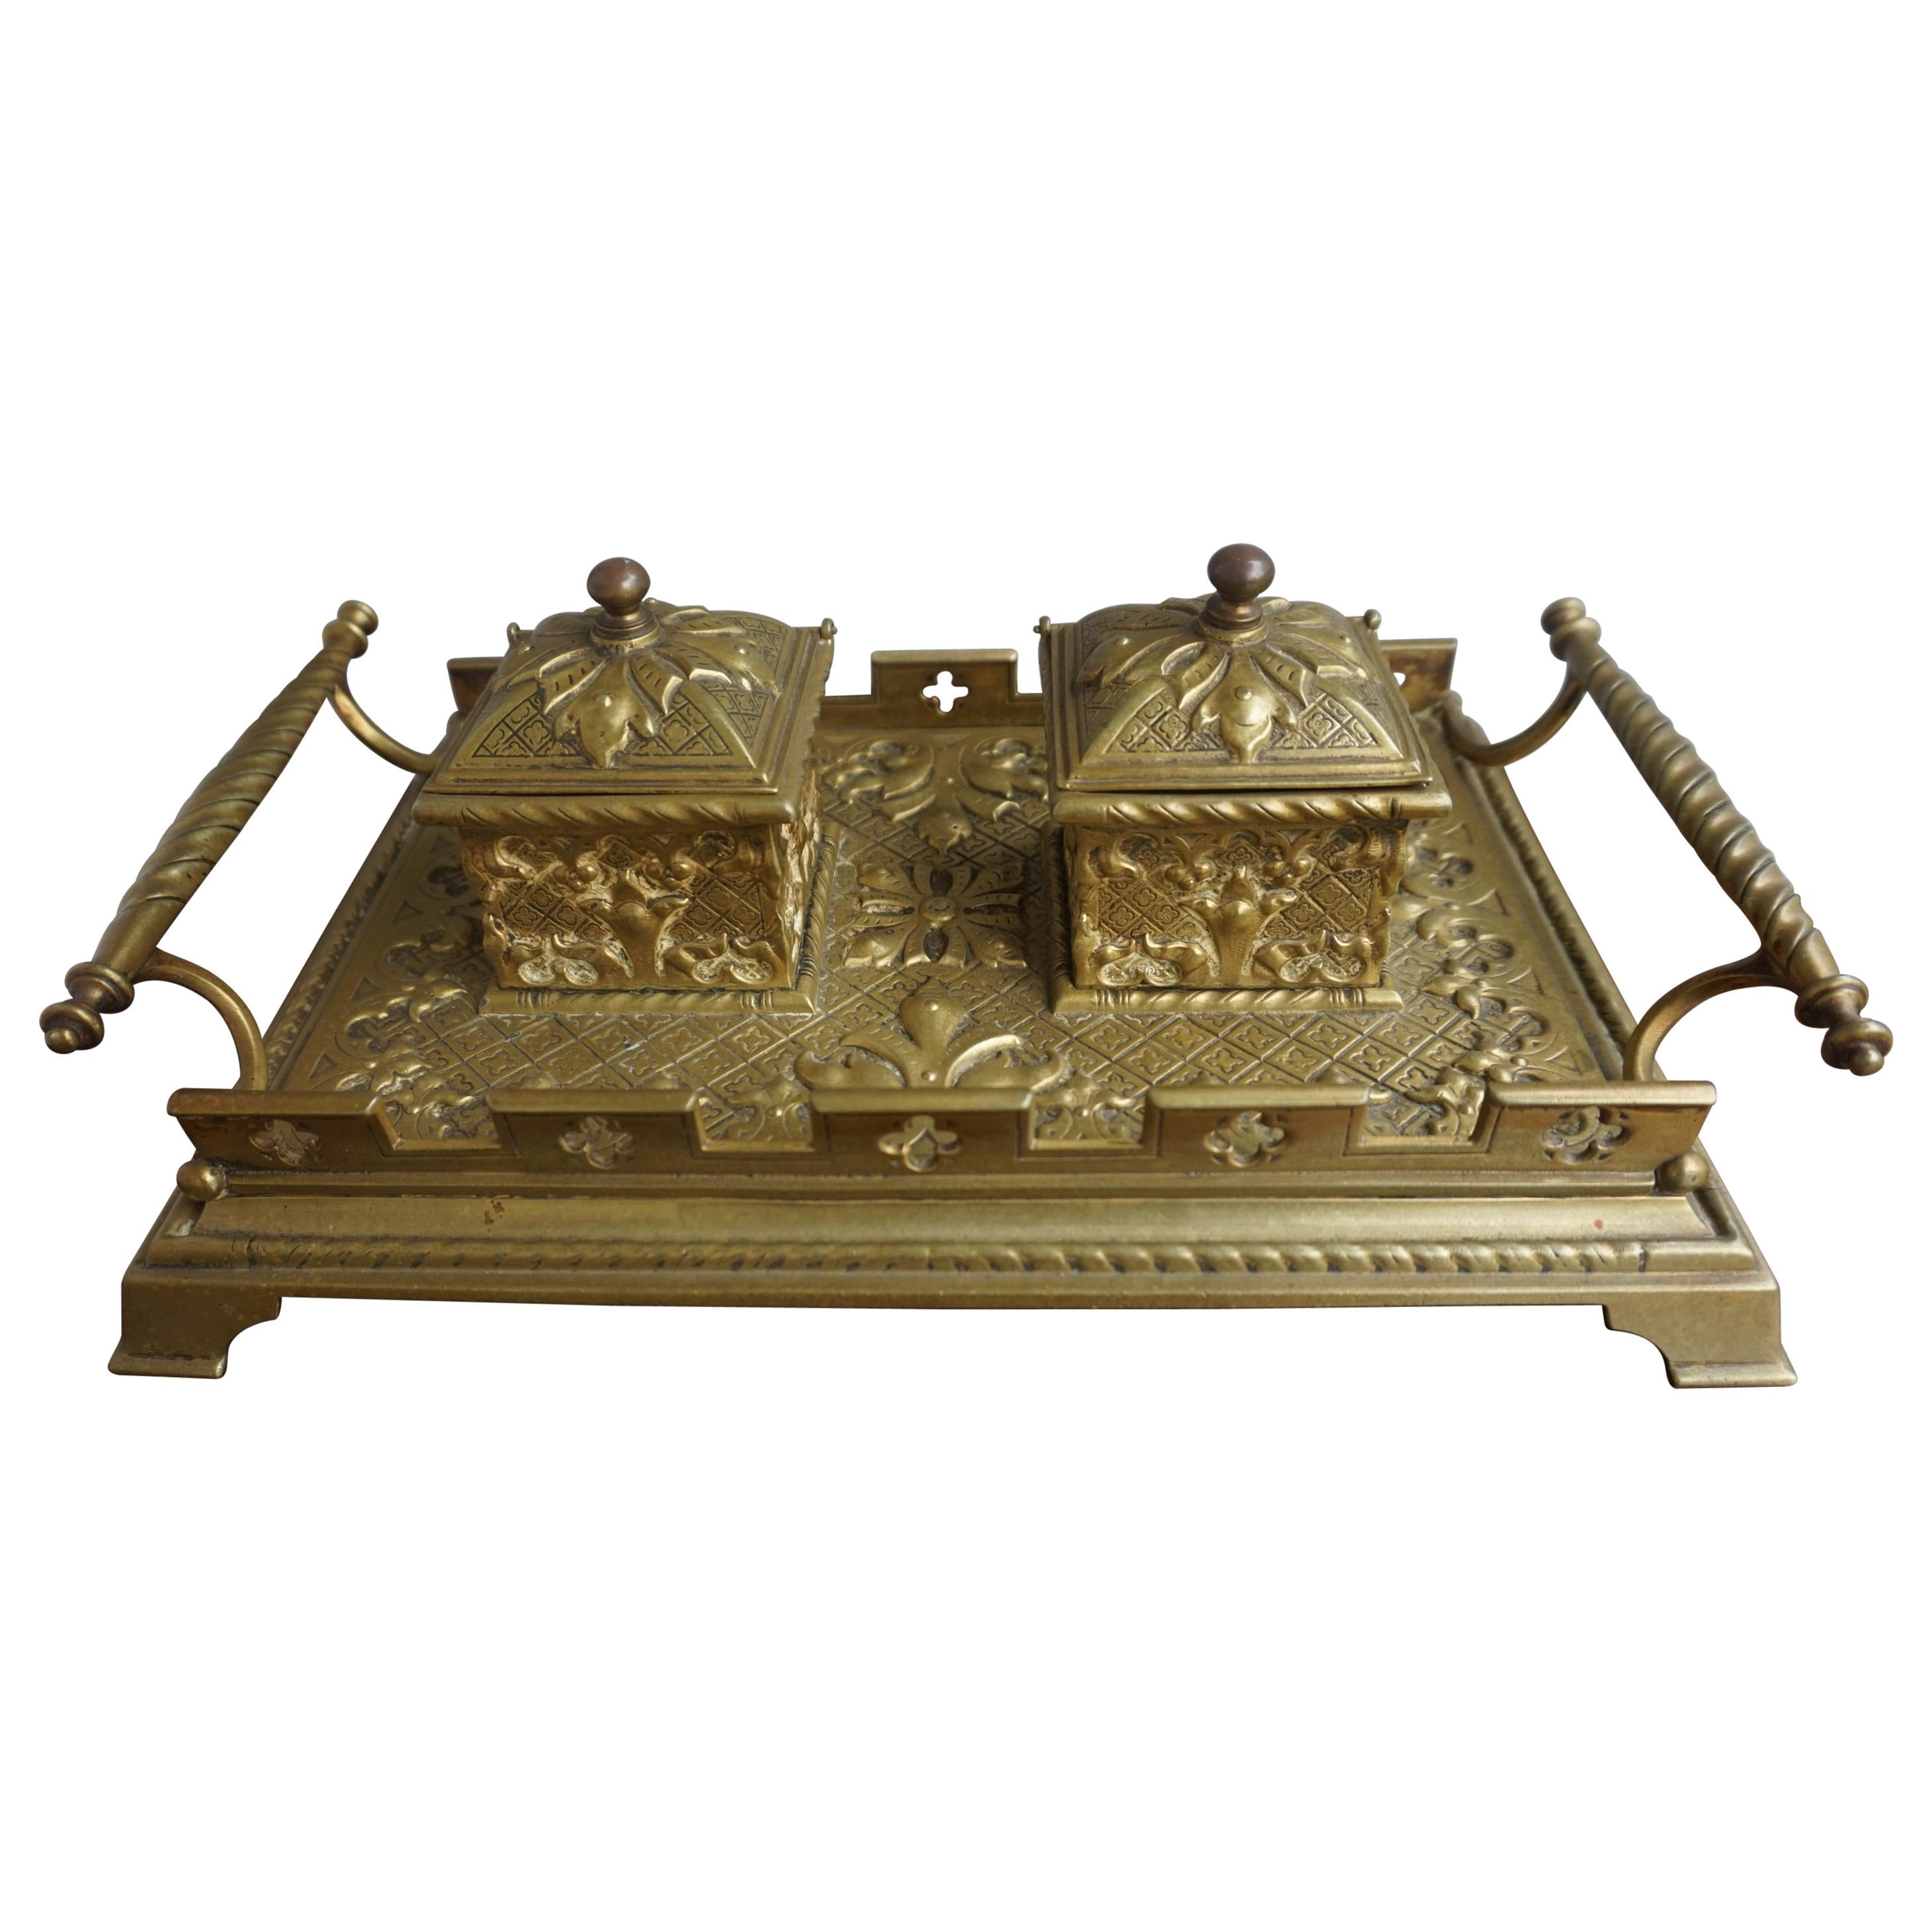 Finest Quality Handcrafted Antique Bronze and Brass Gothic Revival Inkstand